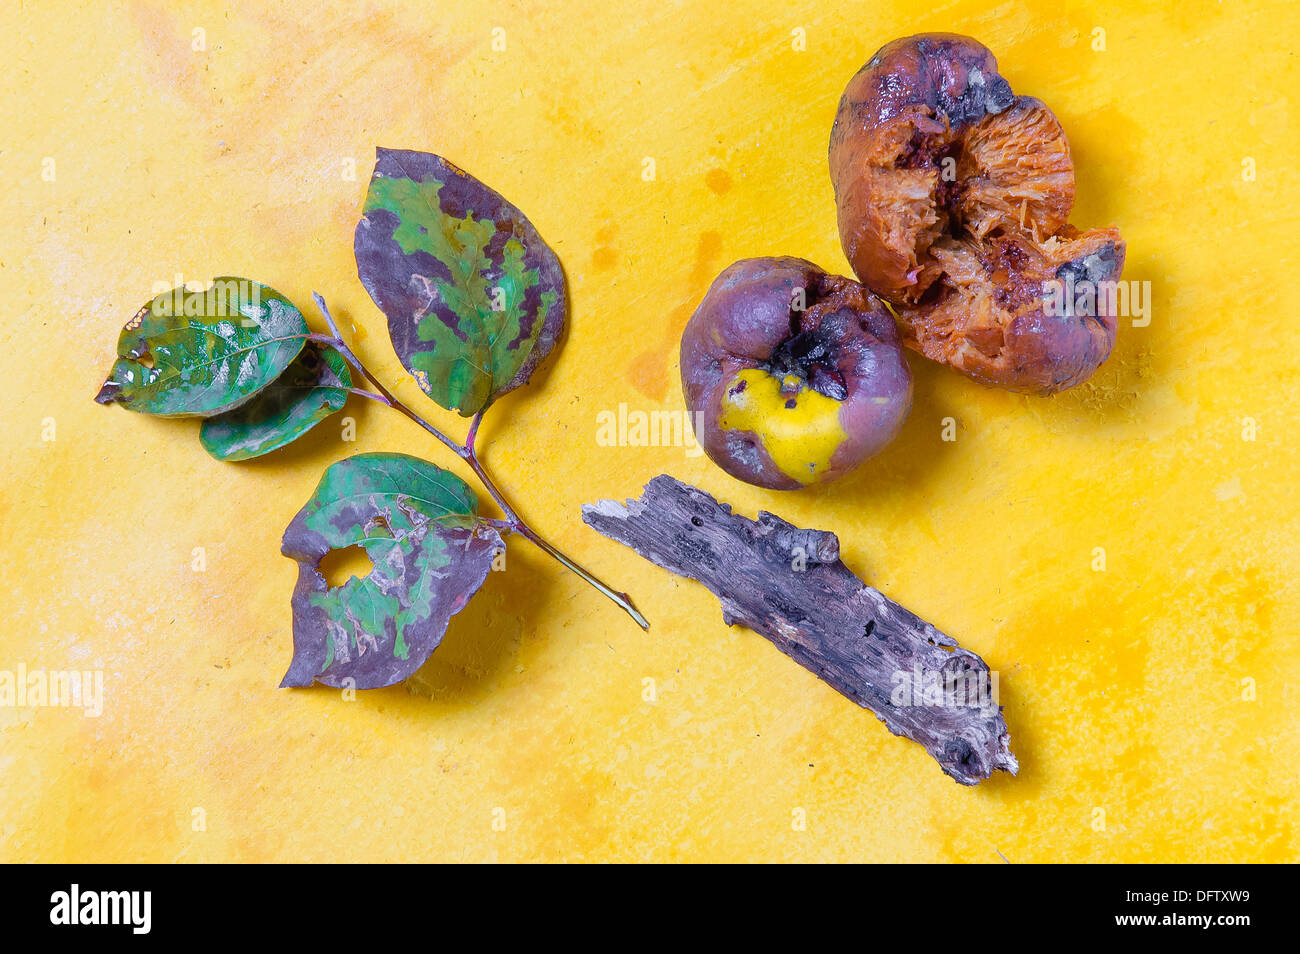 Rotten apples and half dried leaves with a piece of old branch Stock Photo